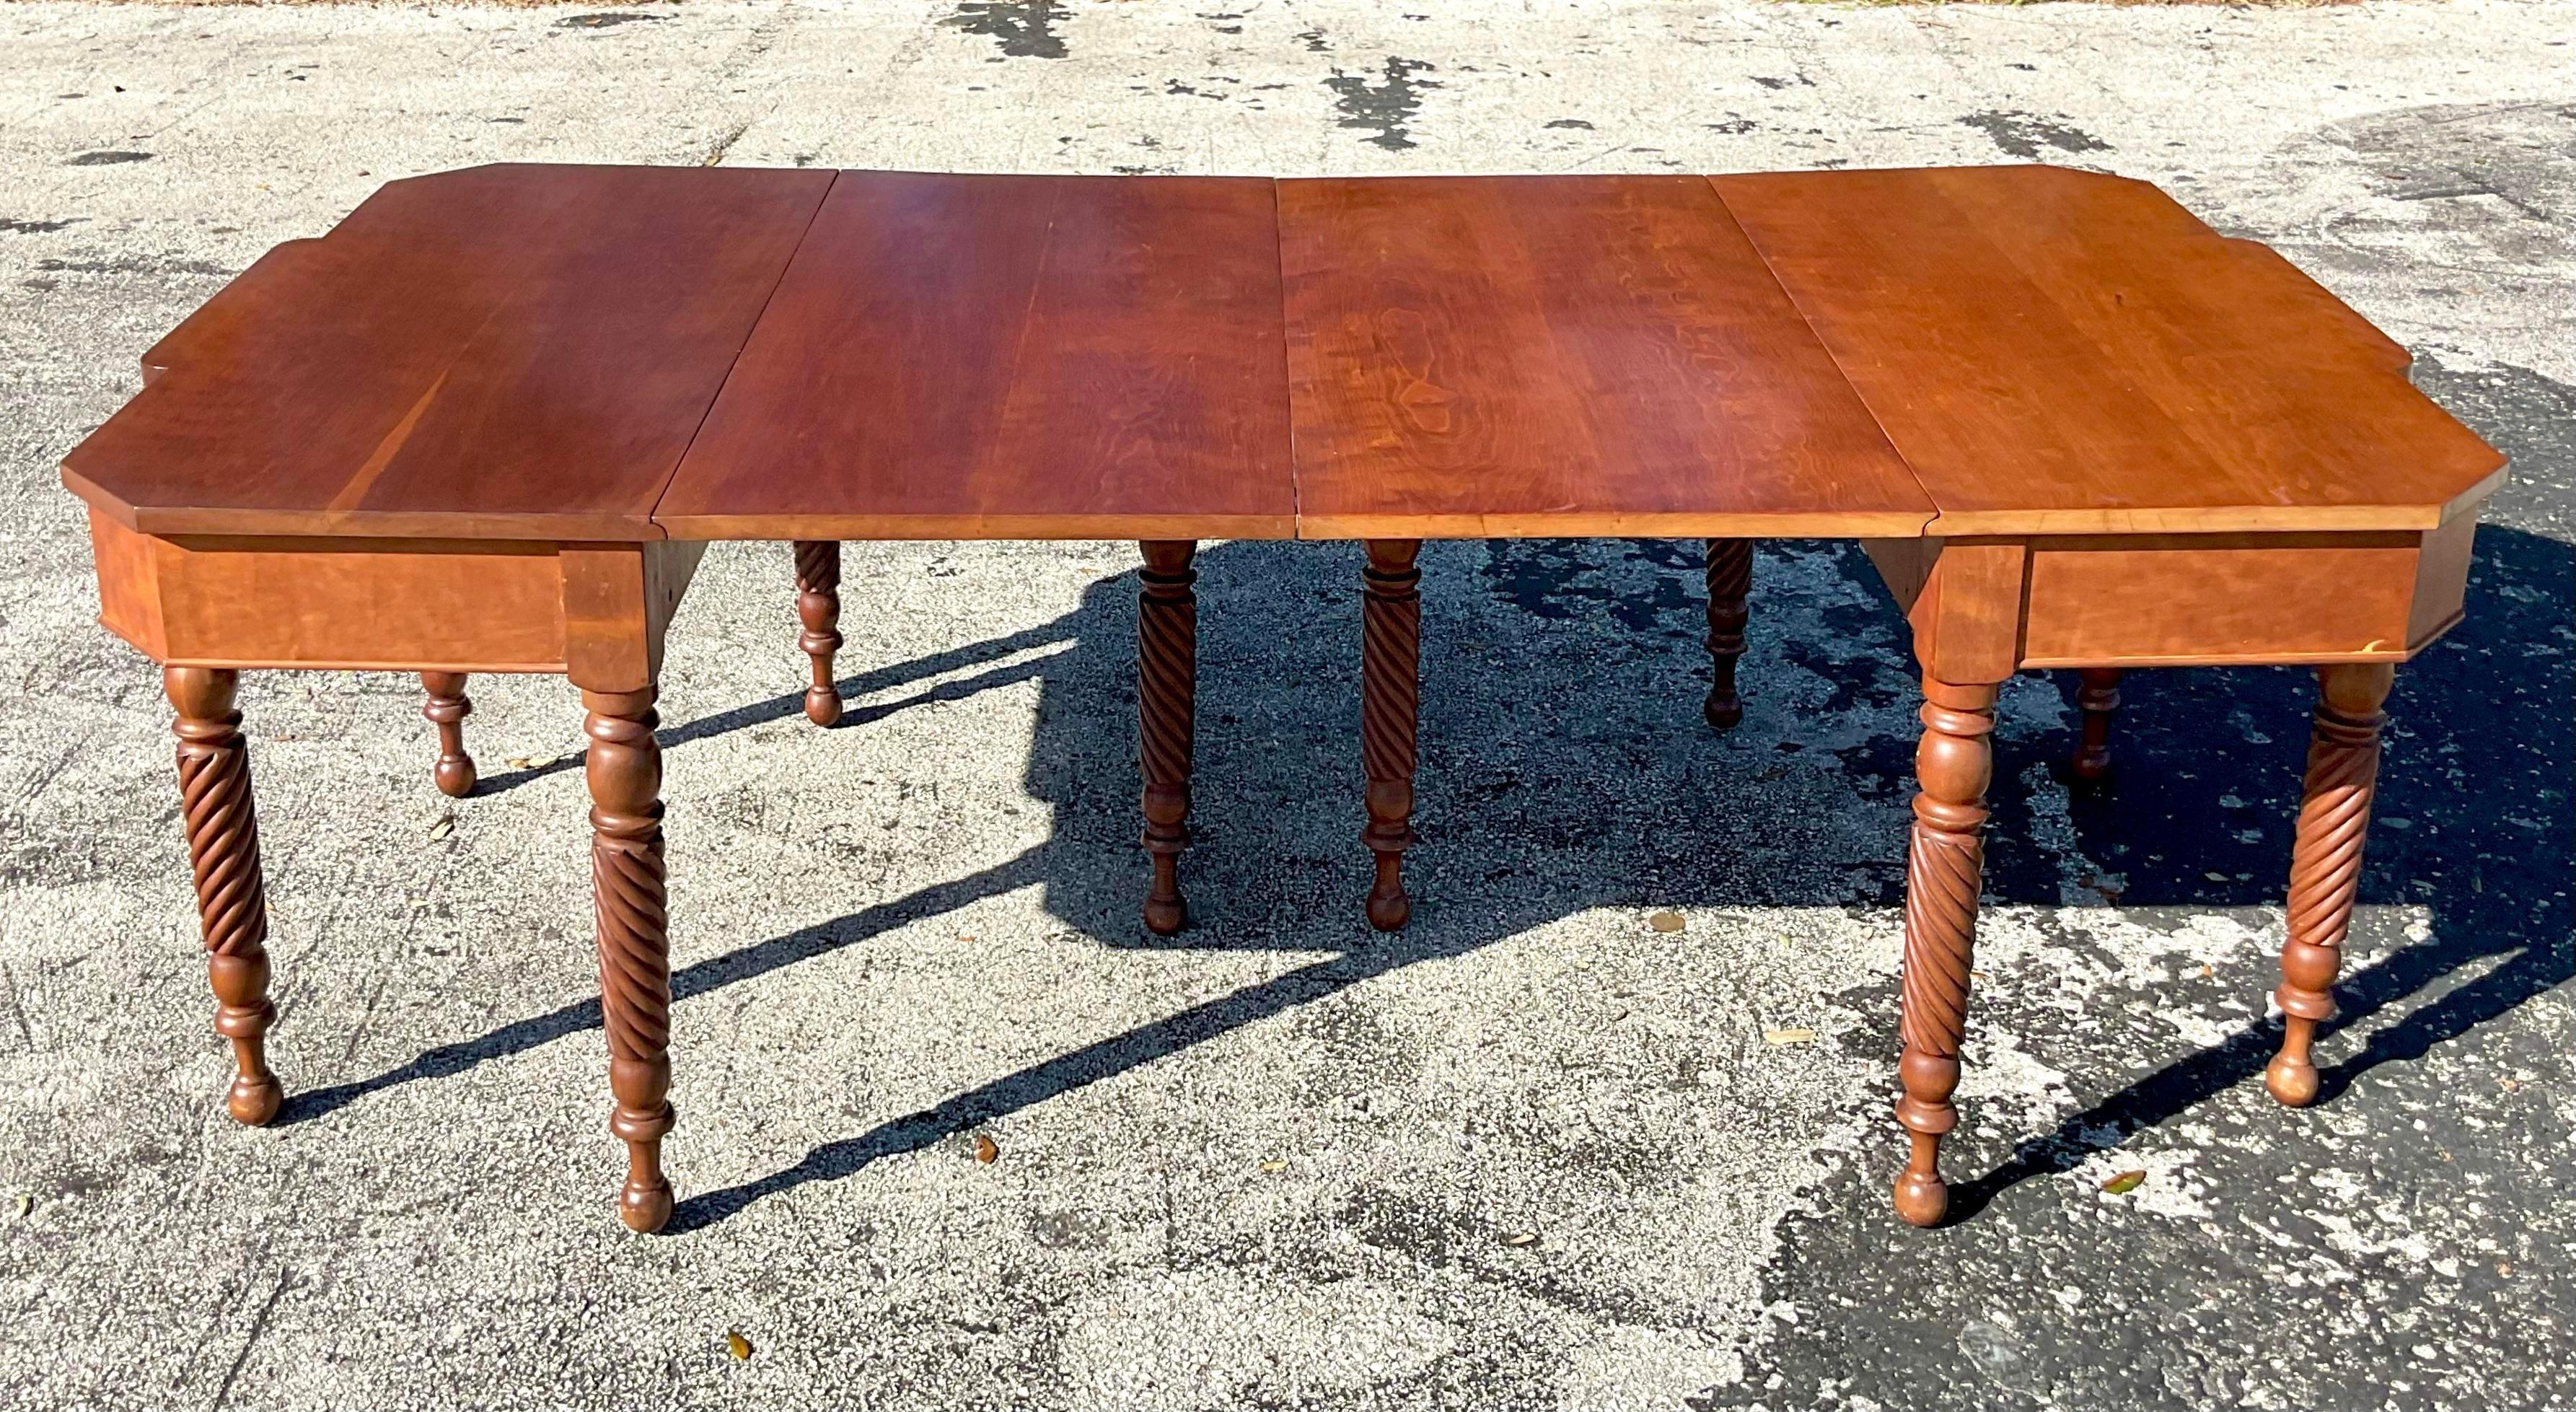 A fabulous pair of vintage Boho console tables. Made by the Botts group and tagged inside the drawer. Gorgeous hand carved detail with a drop leaf design. These console tables have the added benefit that they can be connected to create a full size